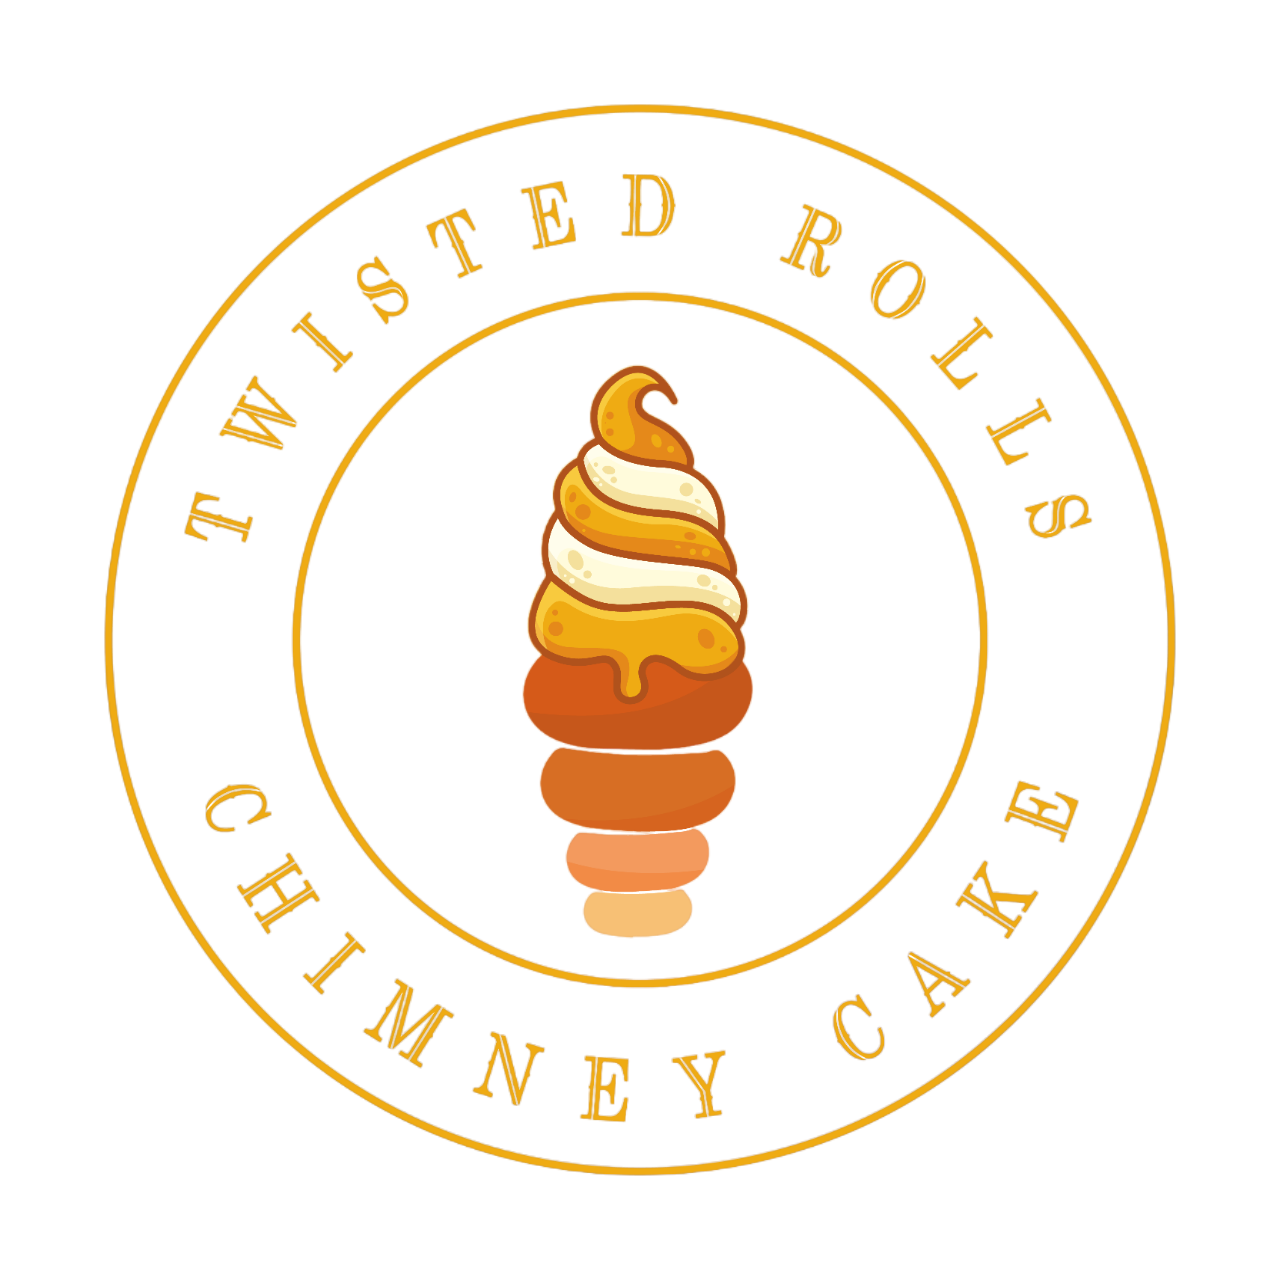 Twisted Rolls Chimney Cakes